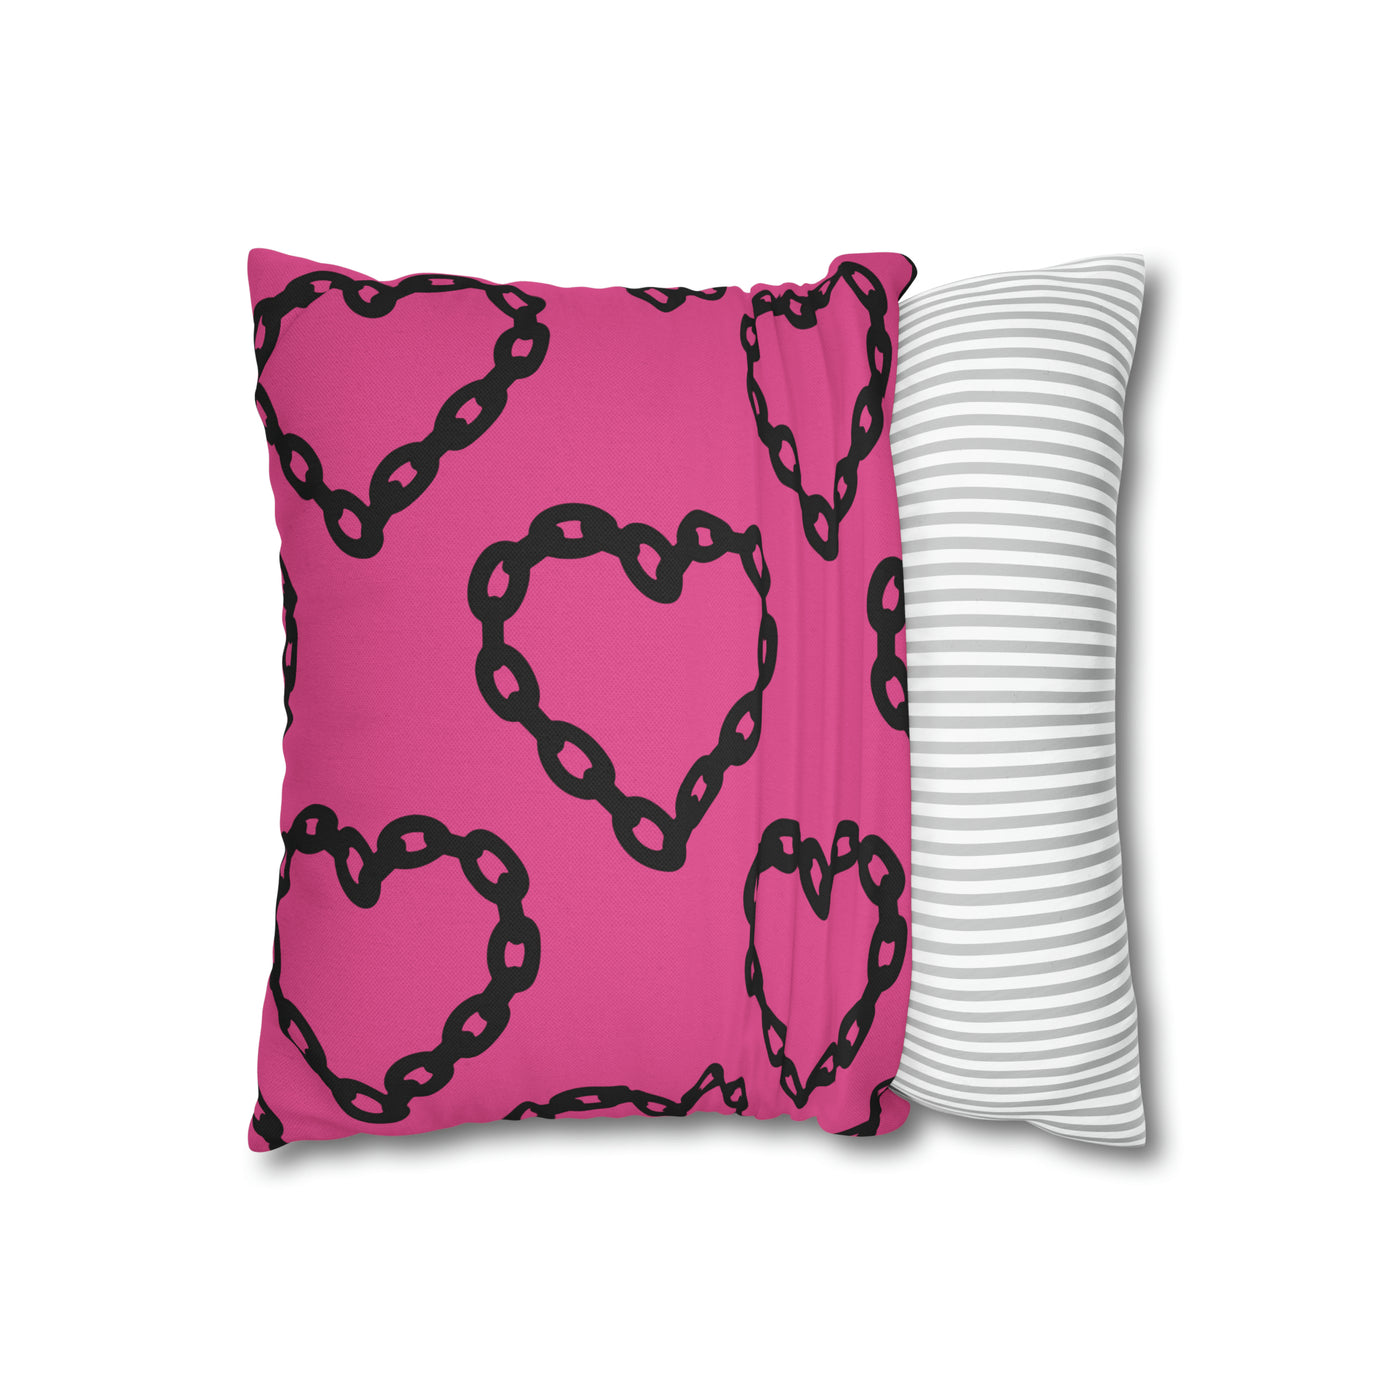 Heart with Chains Pillow Cover, Trendy Pillow Cover, College Pillow Cover